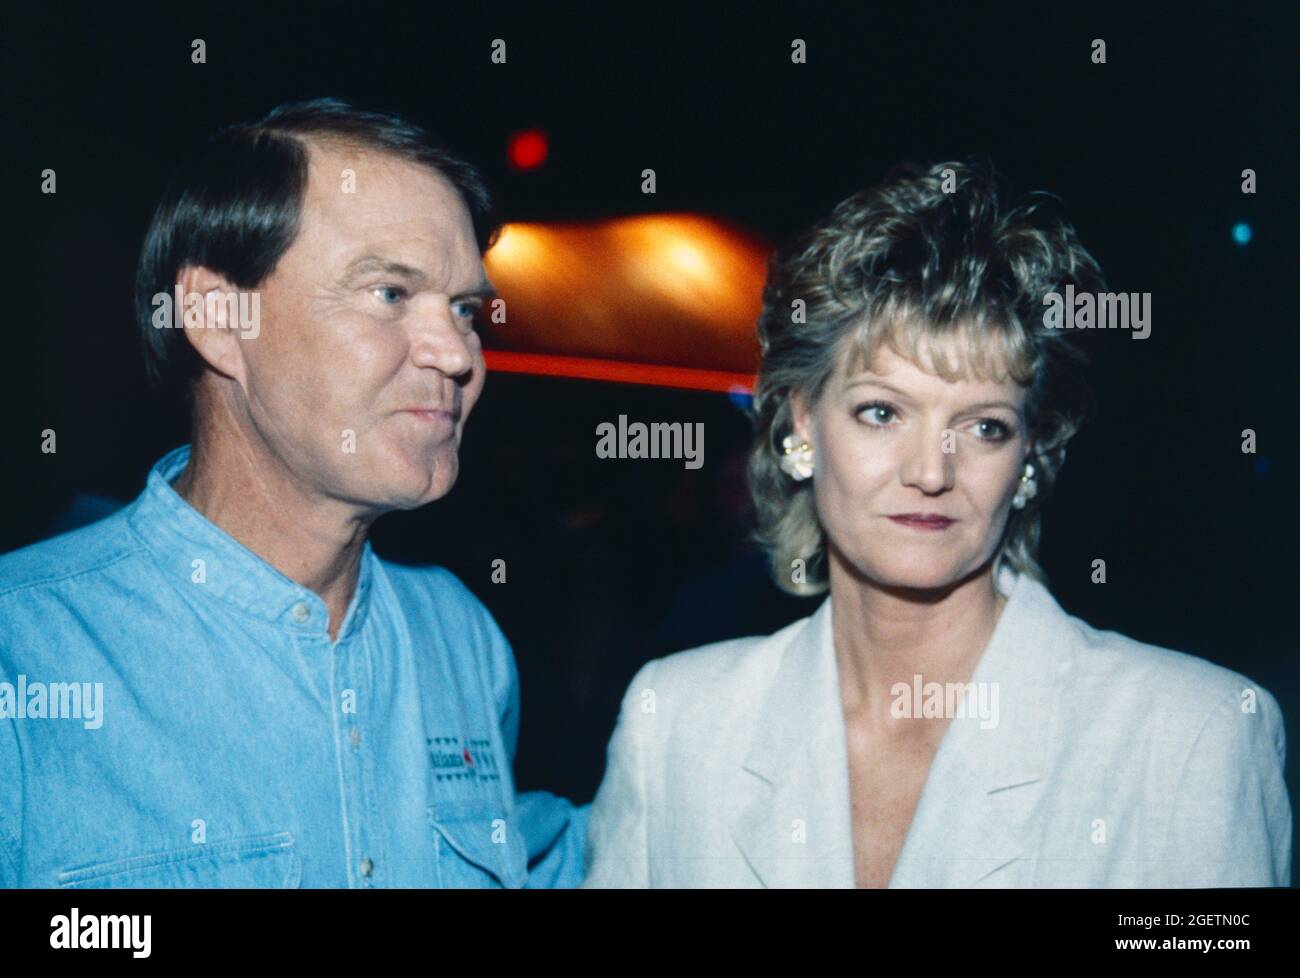 Glen Campbell and his daughter, Debby at Glen Campbell's surprise birthday celebration on April 21, 1996 in Branson, Missouri. Stock Photo